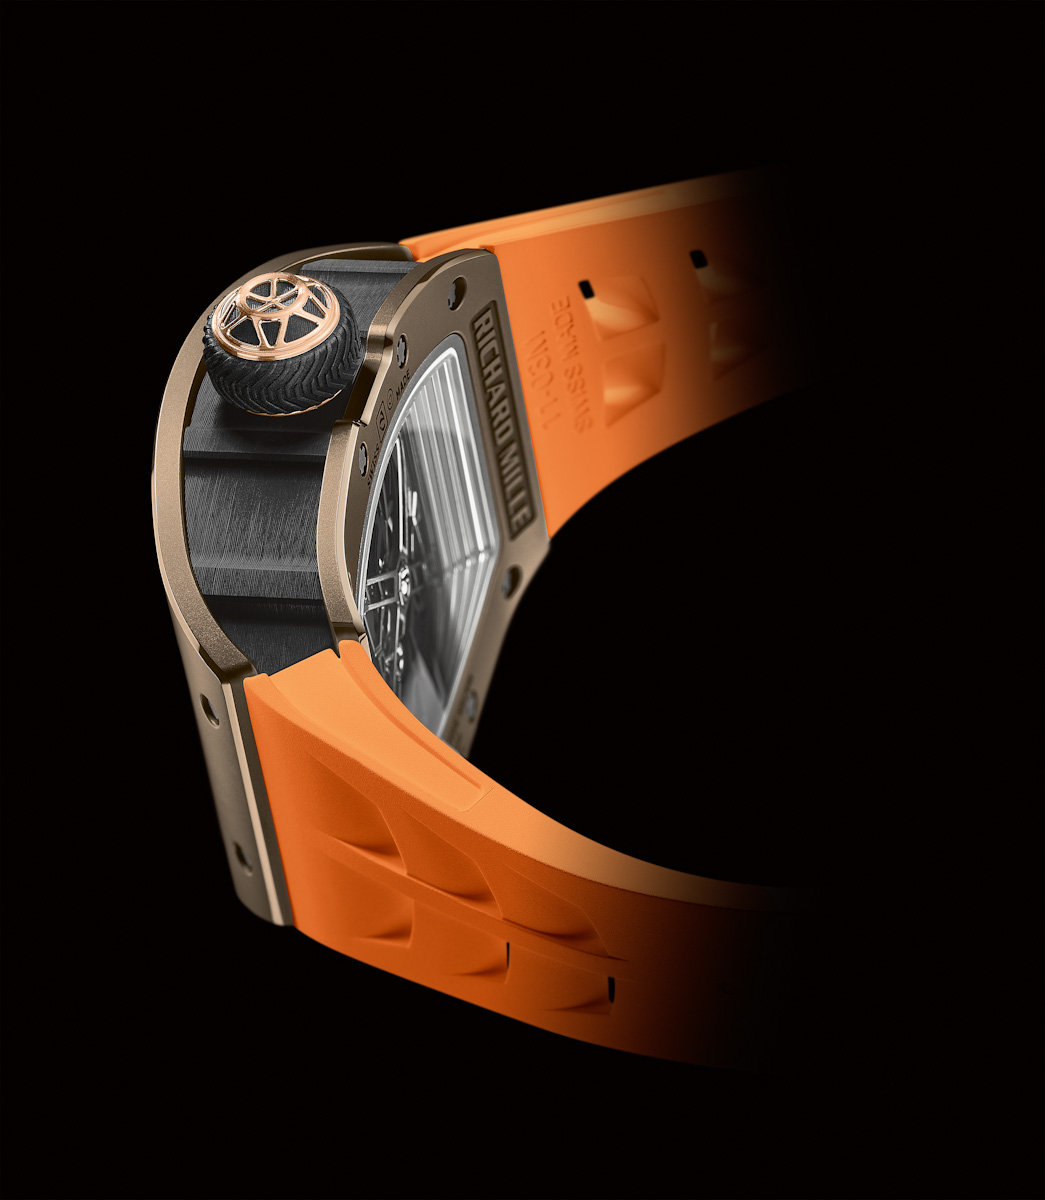 Richard Mille RM 52-05 Tourbillon Pharrell Williams Limited-Edition Collaboration Watch Watch Releases 